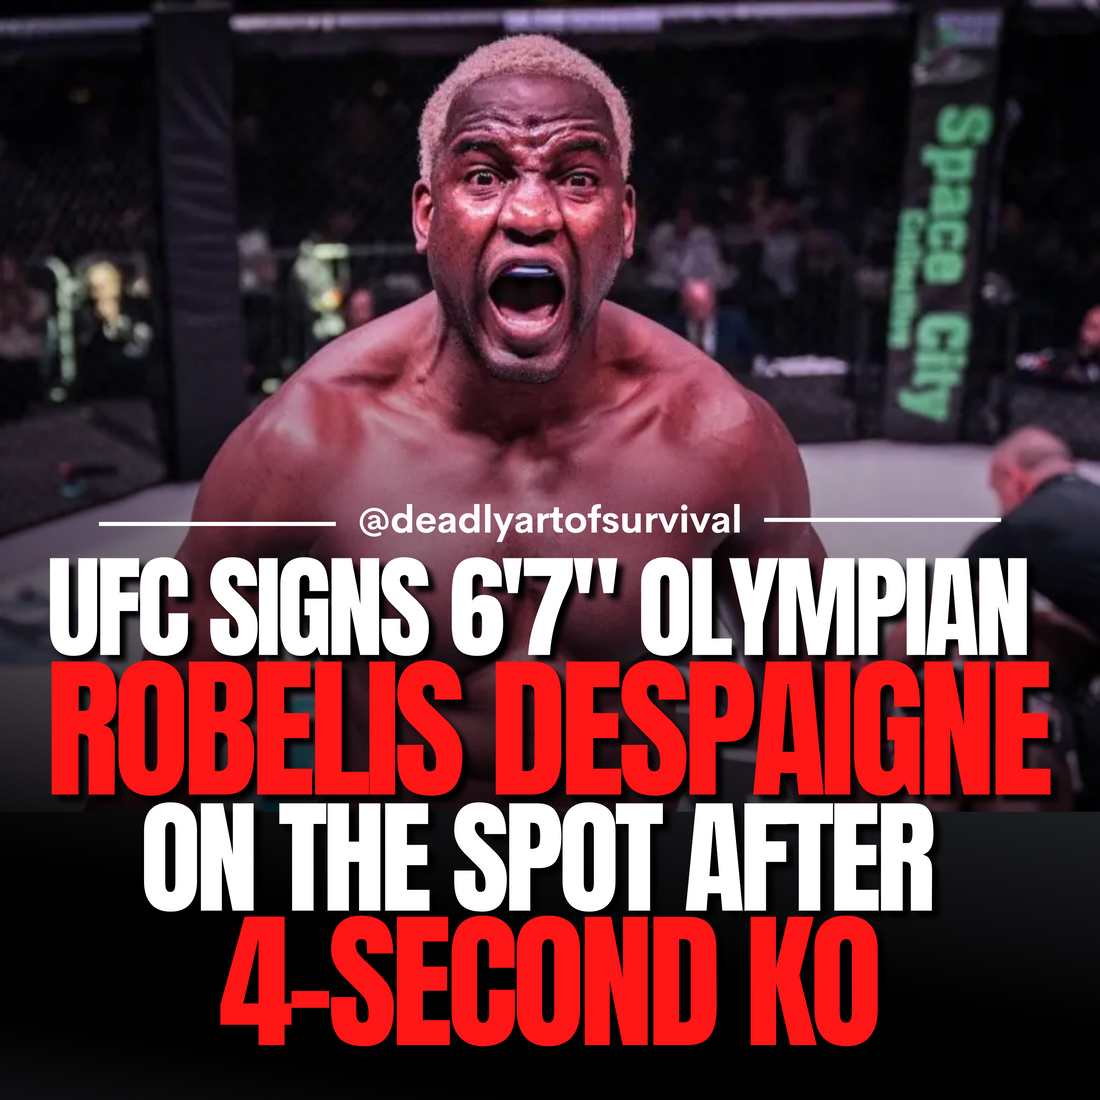 UFC Signs 6'7" Olympian Robelis Despaigne Instantly After 4-Second KO